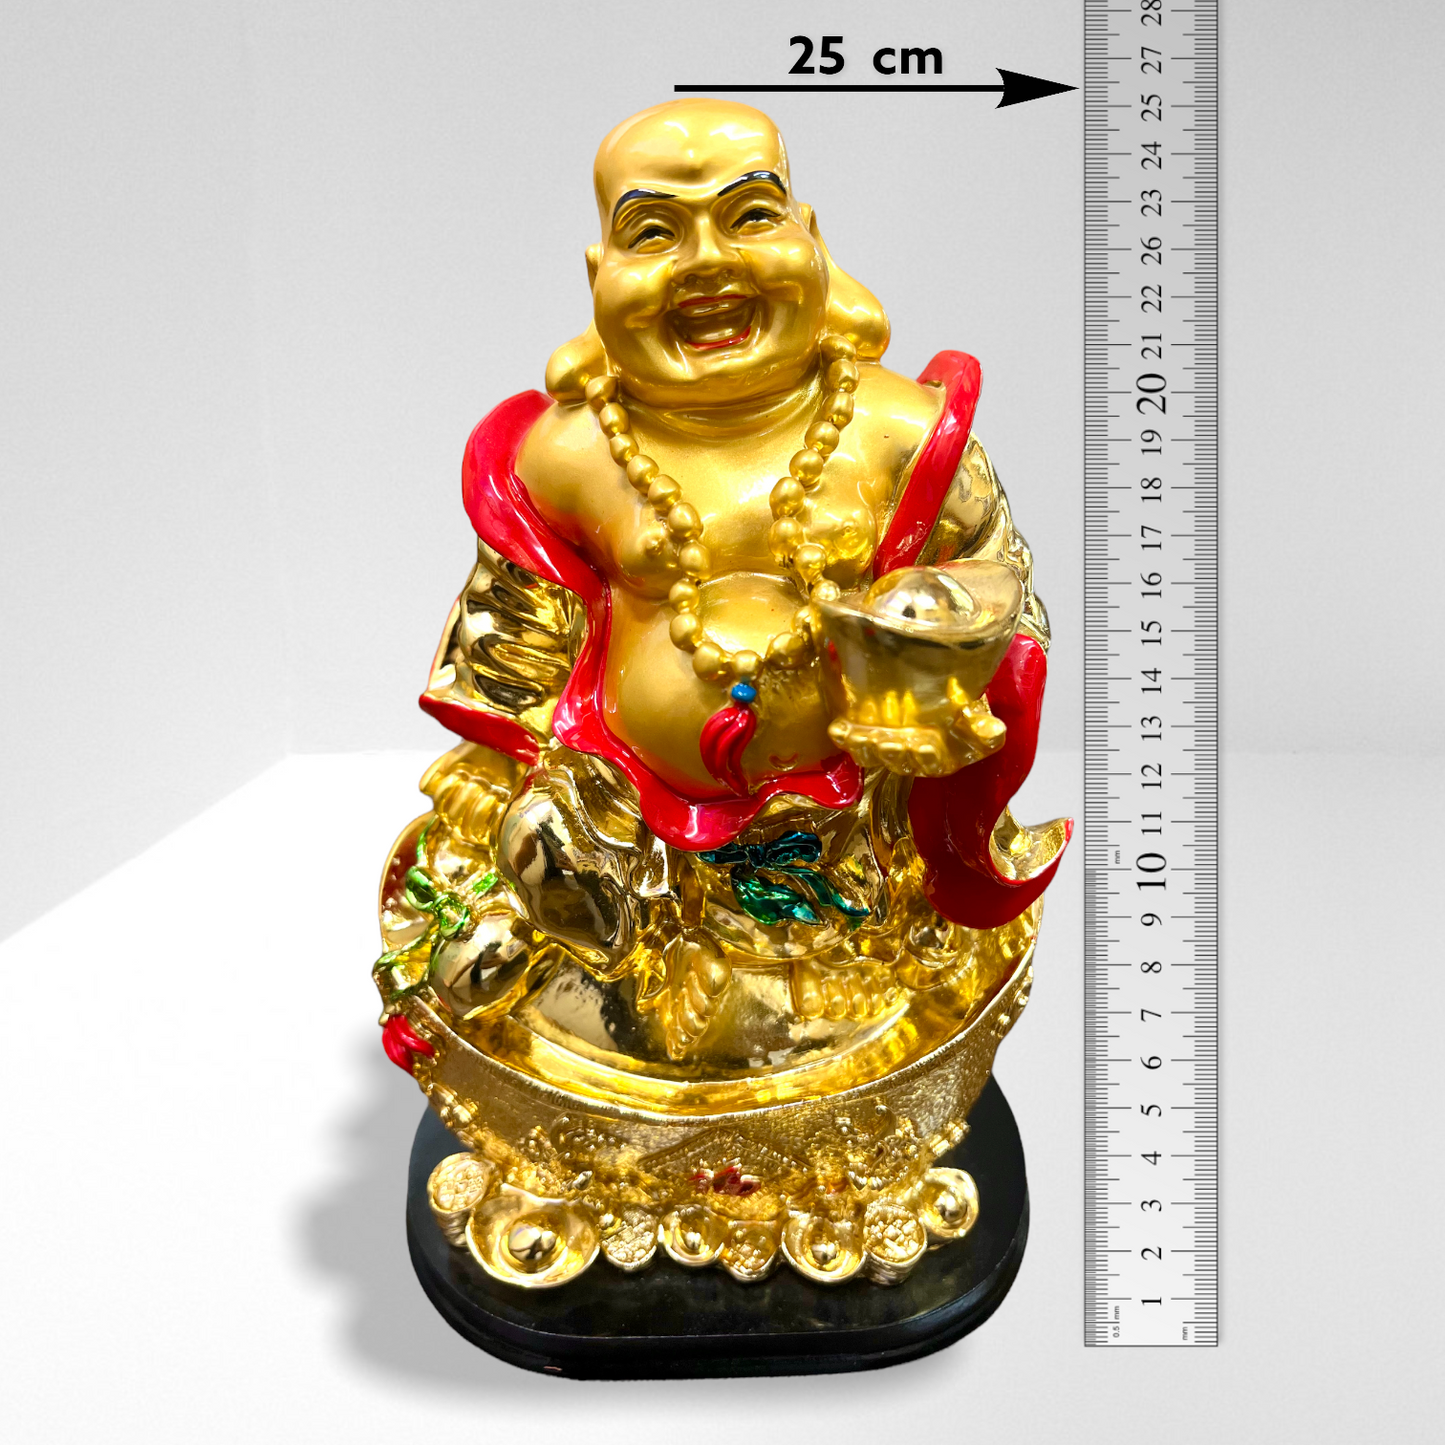 The Wealth Monk